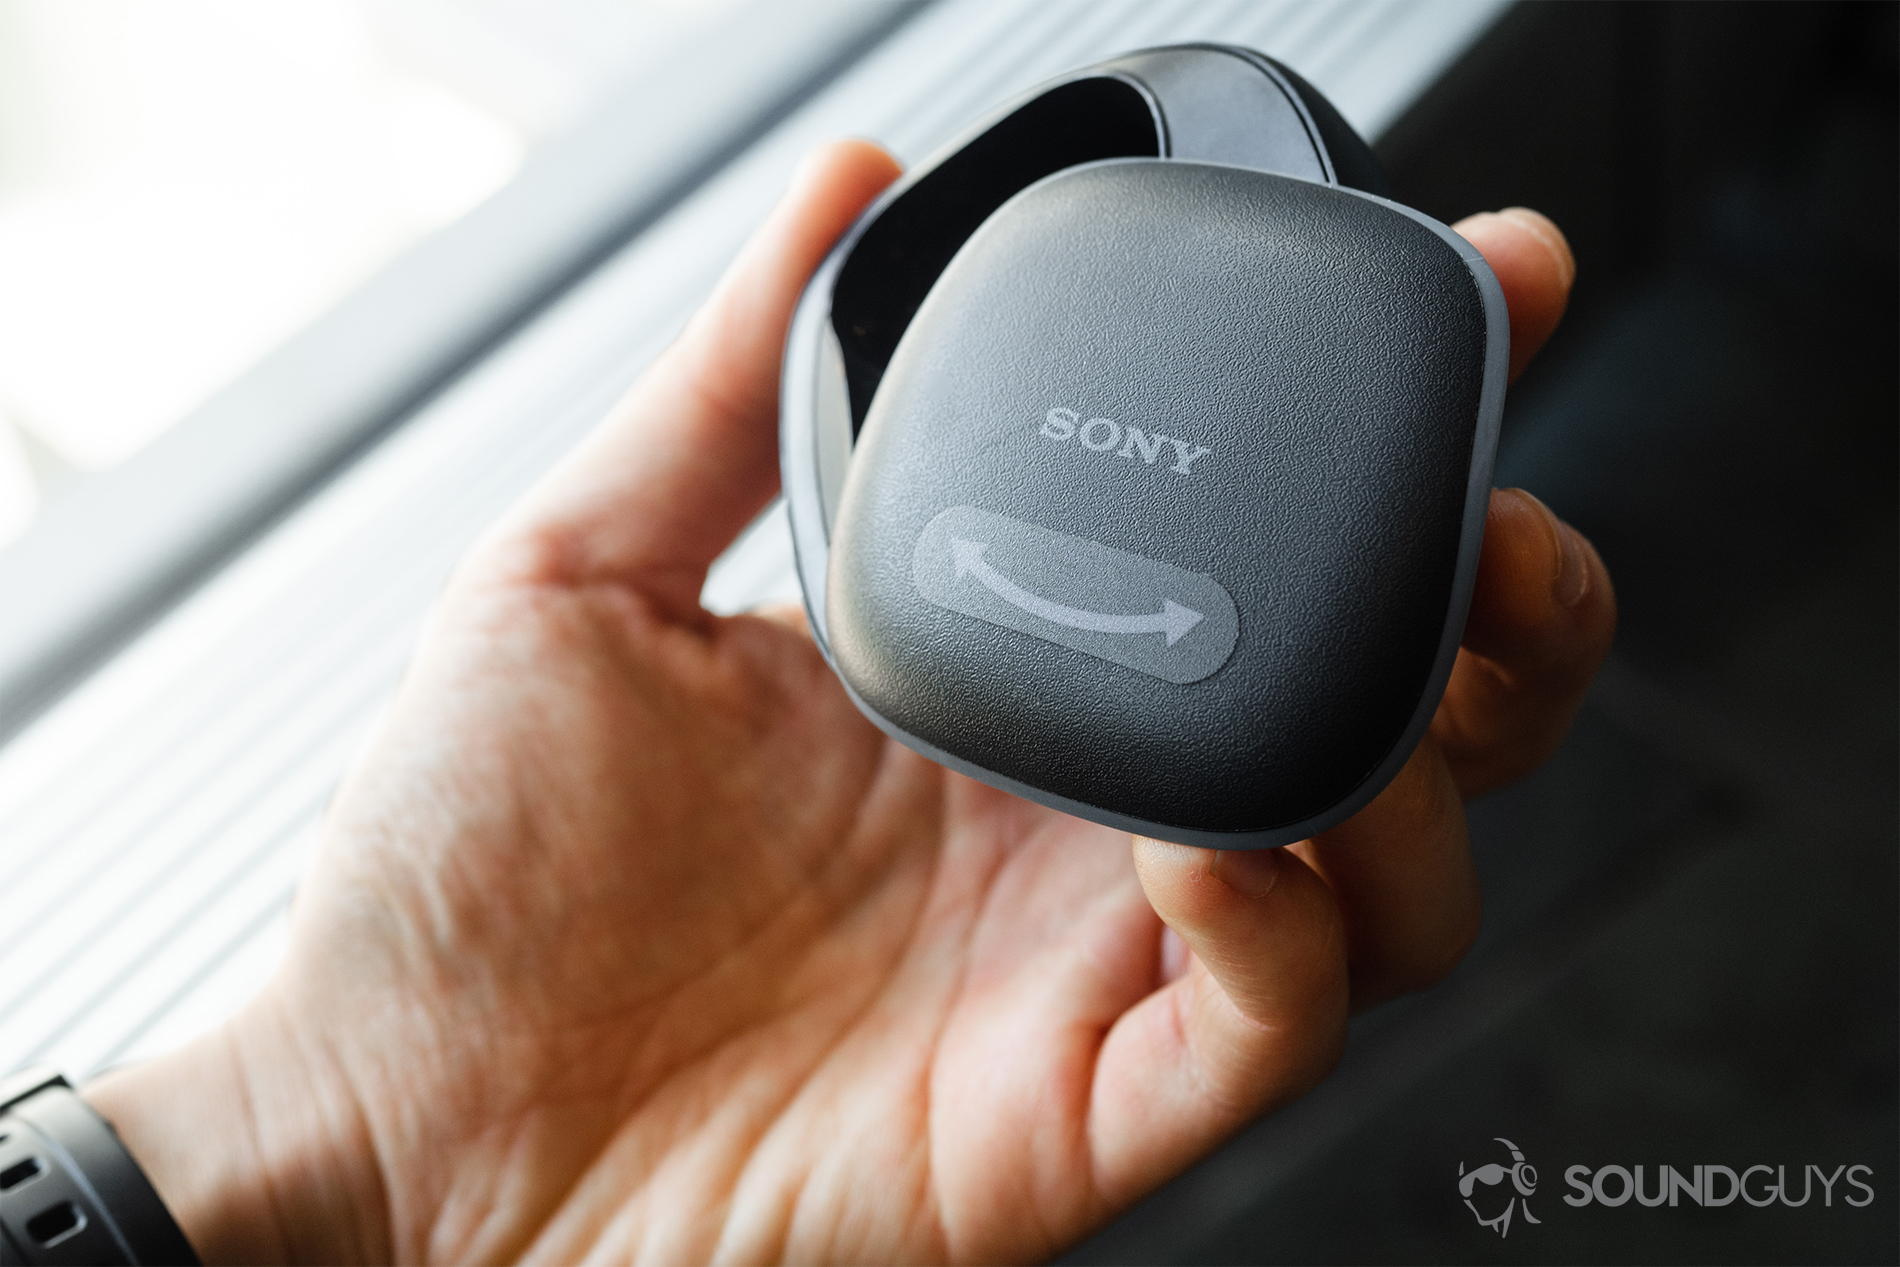 Sony WF-SP700N: The charging case in the hand.